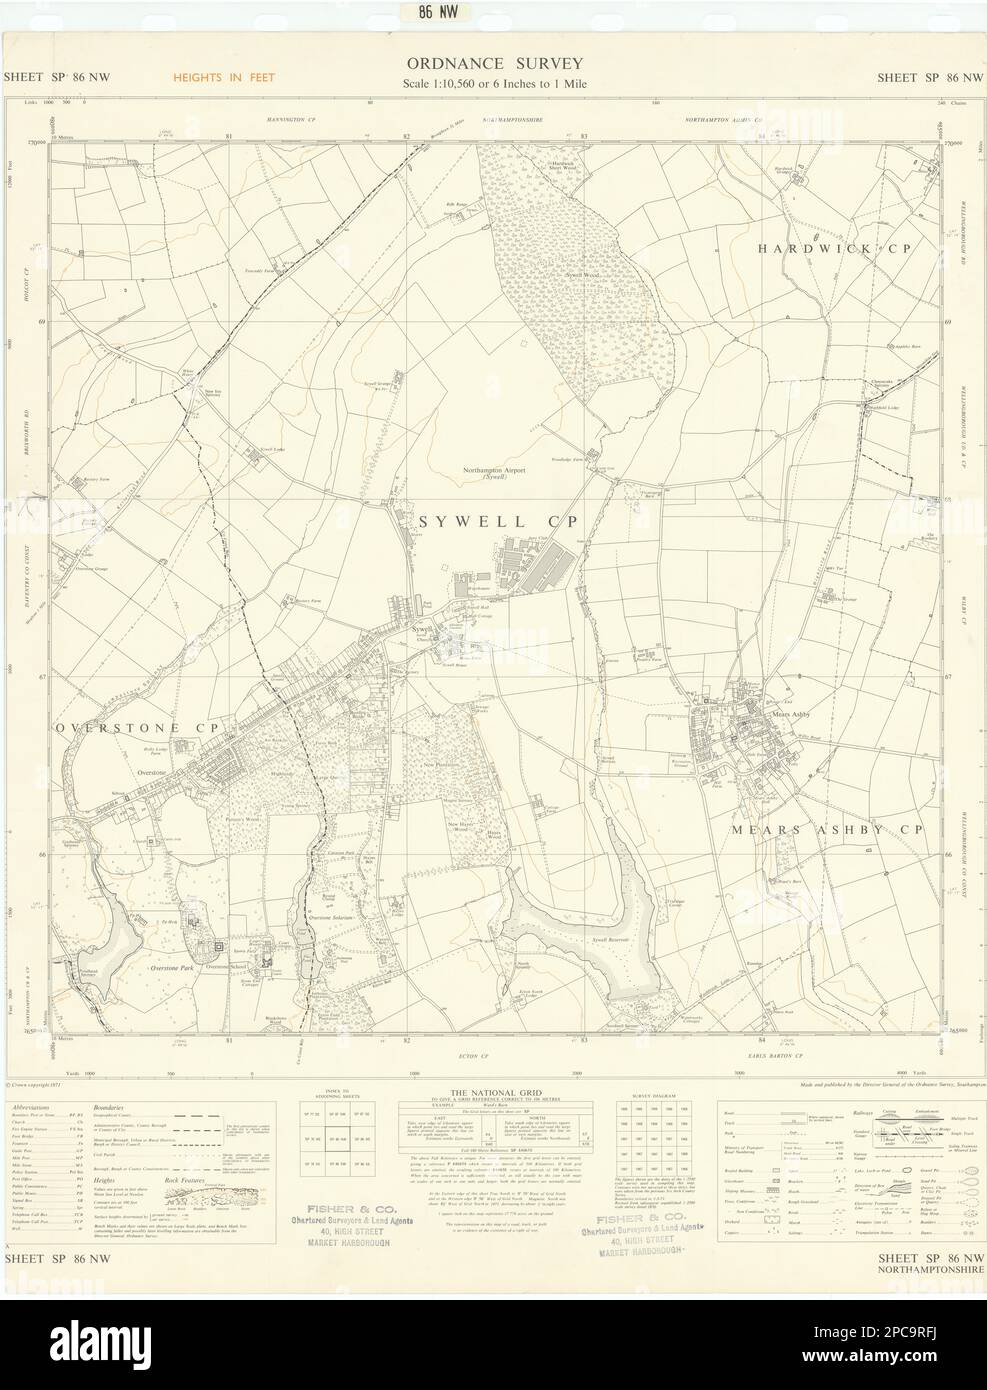 Ordnance Survey SP86NW Northamptonshire Sywell Overstone Mears Ashby 1971 mapa Foto de stock